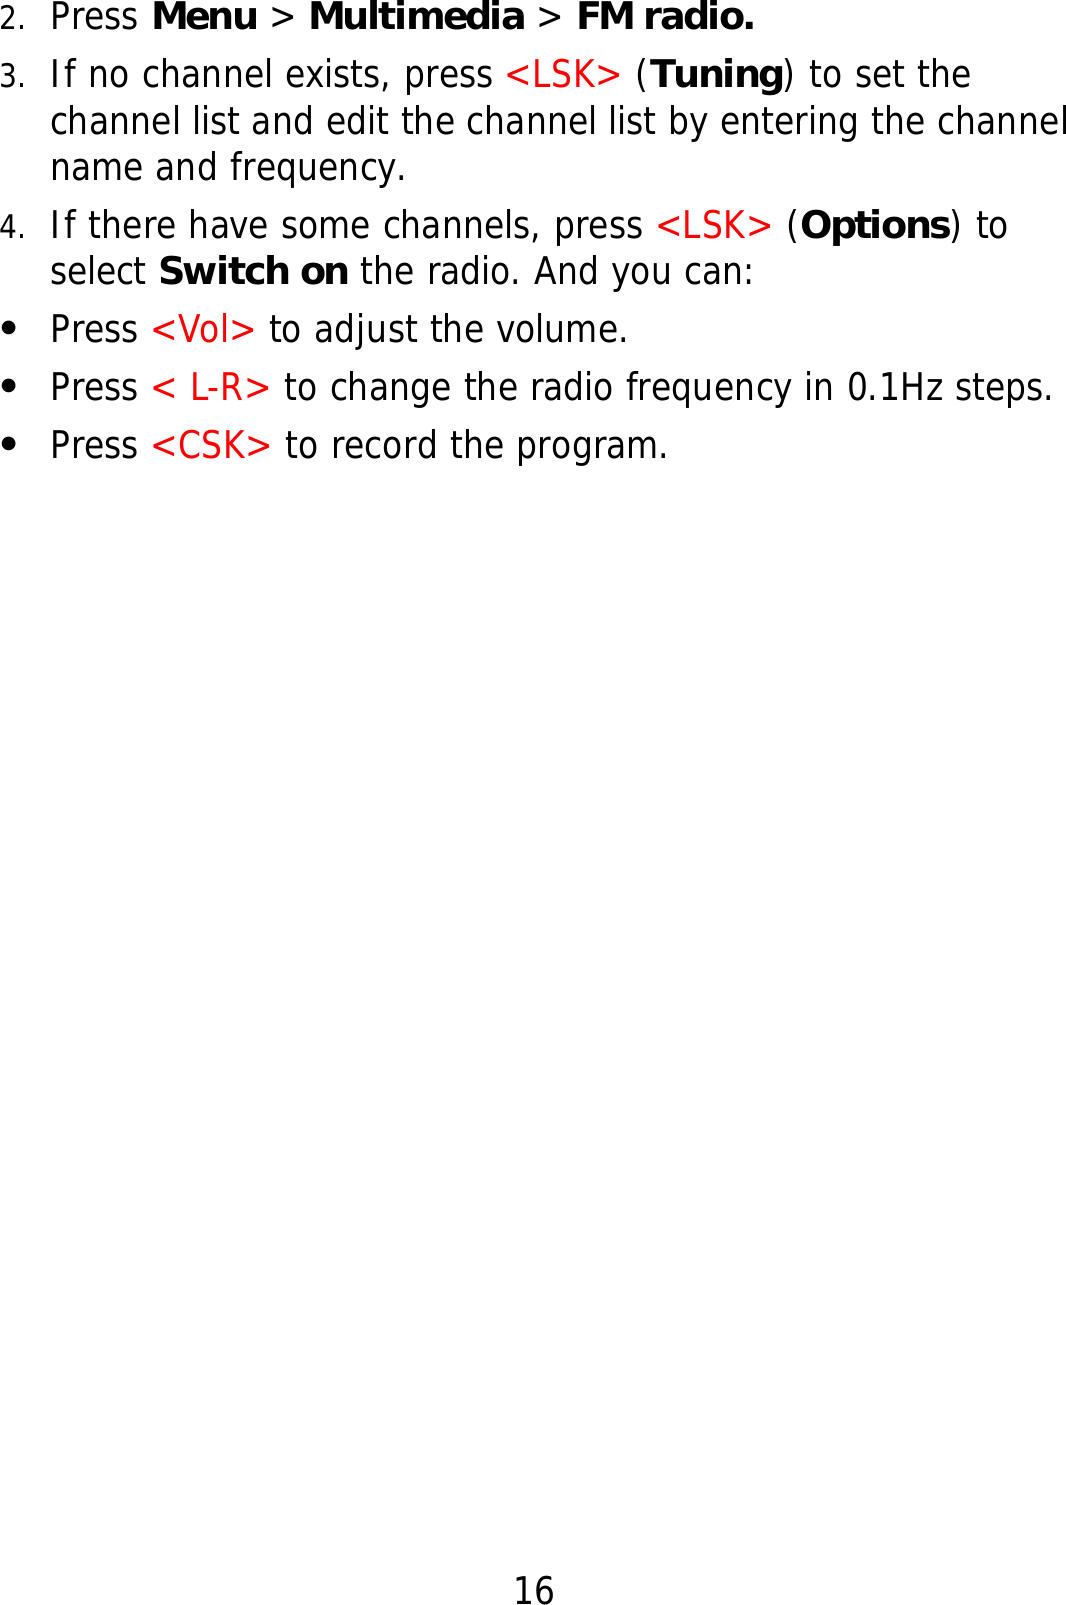 16 2. Press Menu &gt; Multimedia &gt; FM radio. 3. If no channel exists, press &lt;LSK&gt; (Tuning) to set the channel list and edit the channel list by entering the channel name and frequency. 4. If there have some channels, press &lt;LSK&gt; (Options) to select Switch on the radio. And you can: z Press &lt;Vol&gt; to adjust the volume. z Press &lt; L-R&gt; to change the radio frequency in 0.1Hz steps. z Press &lt;CSK&gt; to record the program.   